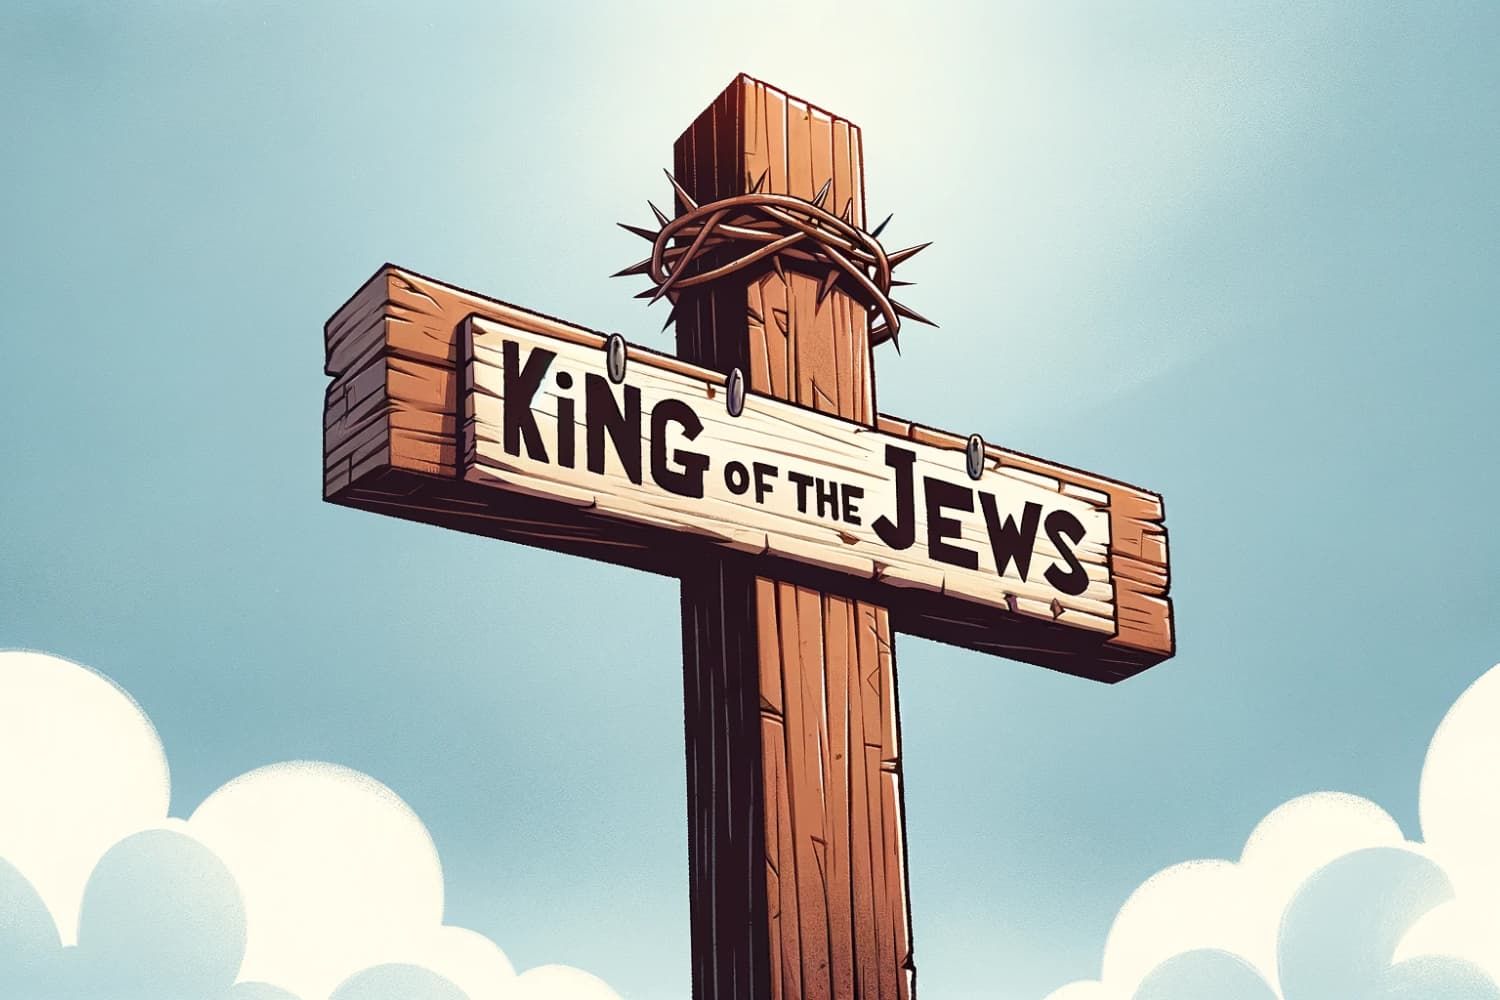 Lesson%20-%20NT%20Easter%2006%20-%20Jesus%20king%20of%20the%20Jews-1a7fec3c Lessons